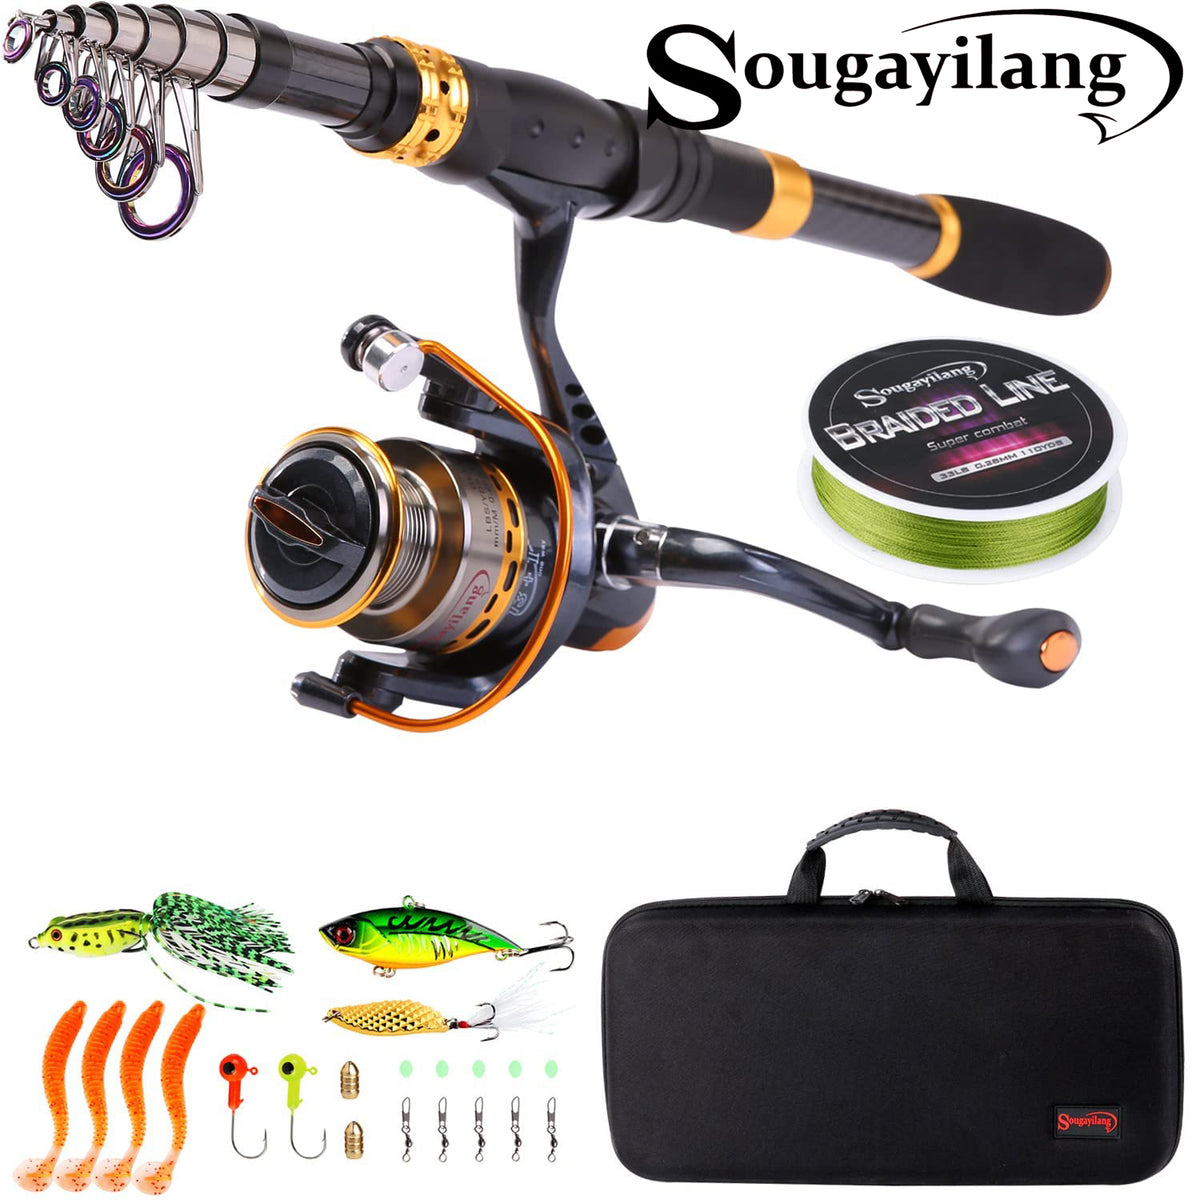 Sougayilang Fishing Rod and Reel Combos - Carbon Fiber Telescopic Fishing  Pole - Spinning Reel 12 +1 BB with Carrying Case for Saltwater and  Freshwater Fishing …